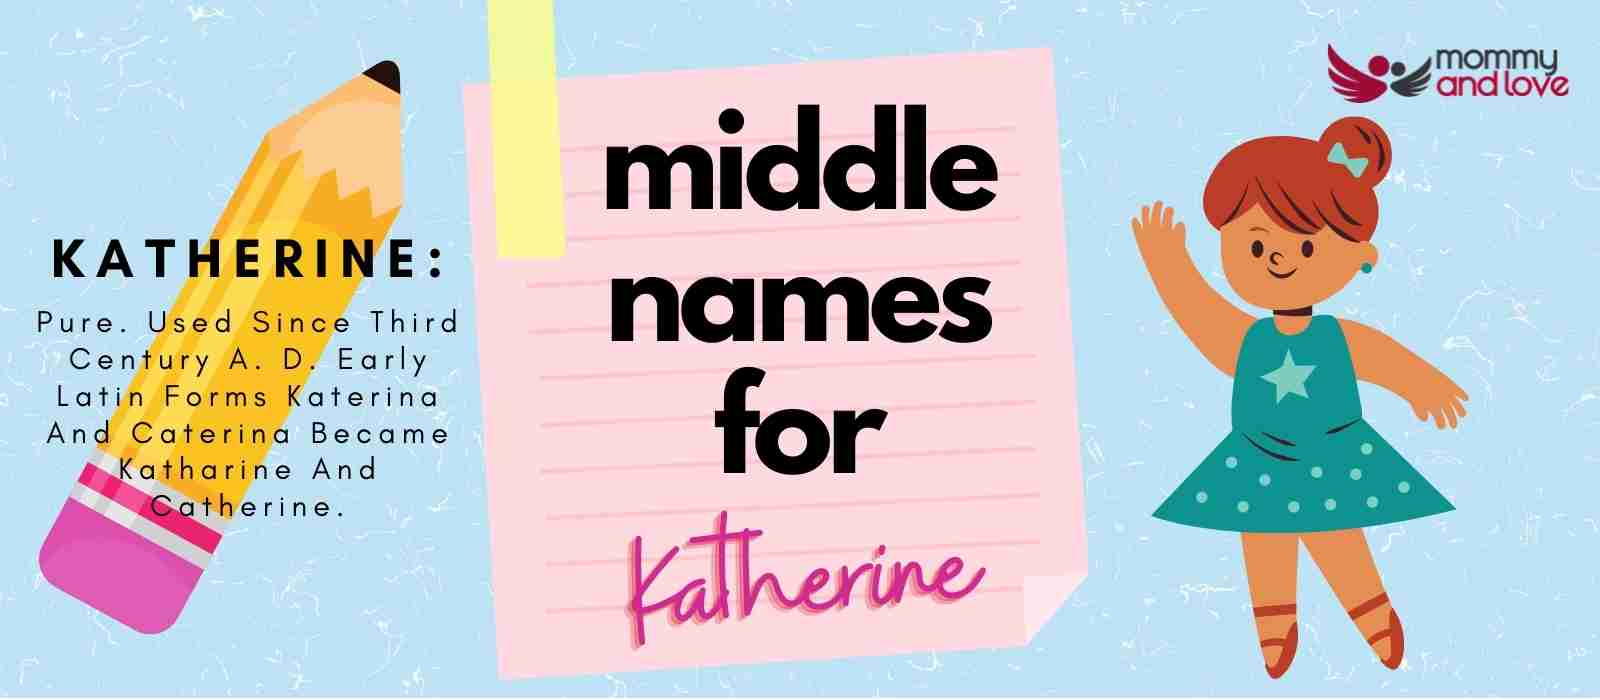 Middle Names for Katherine